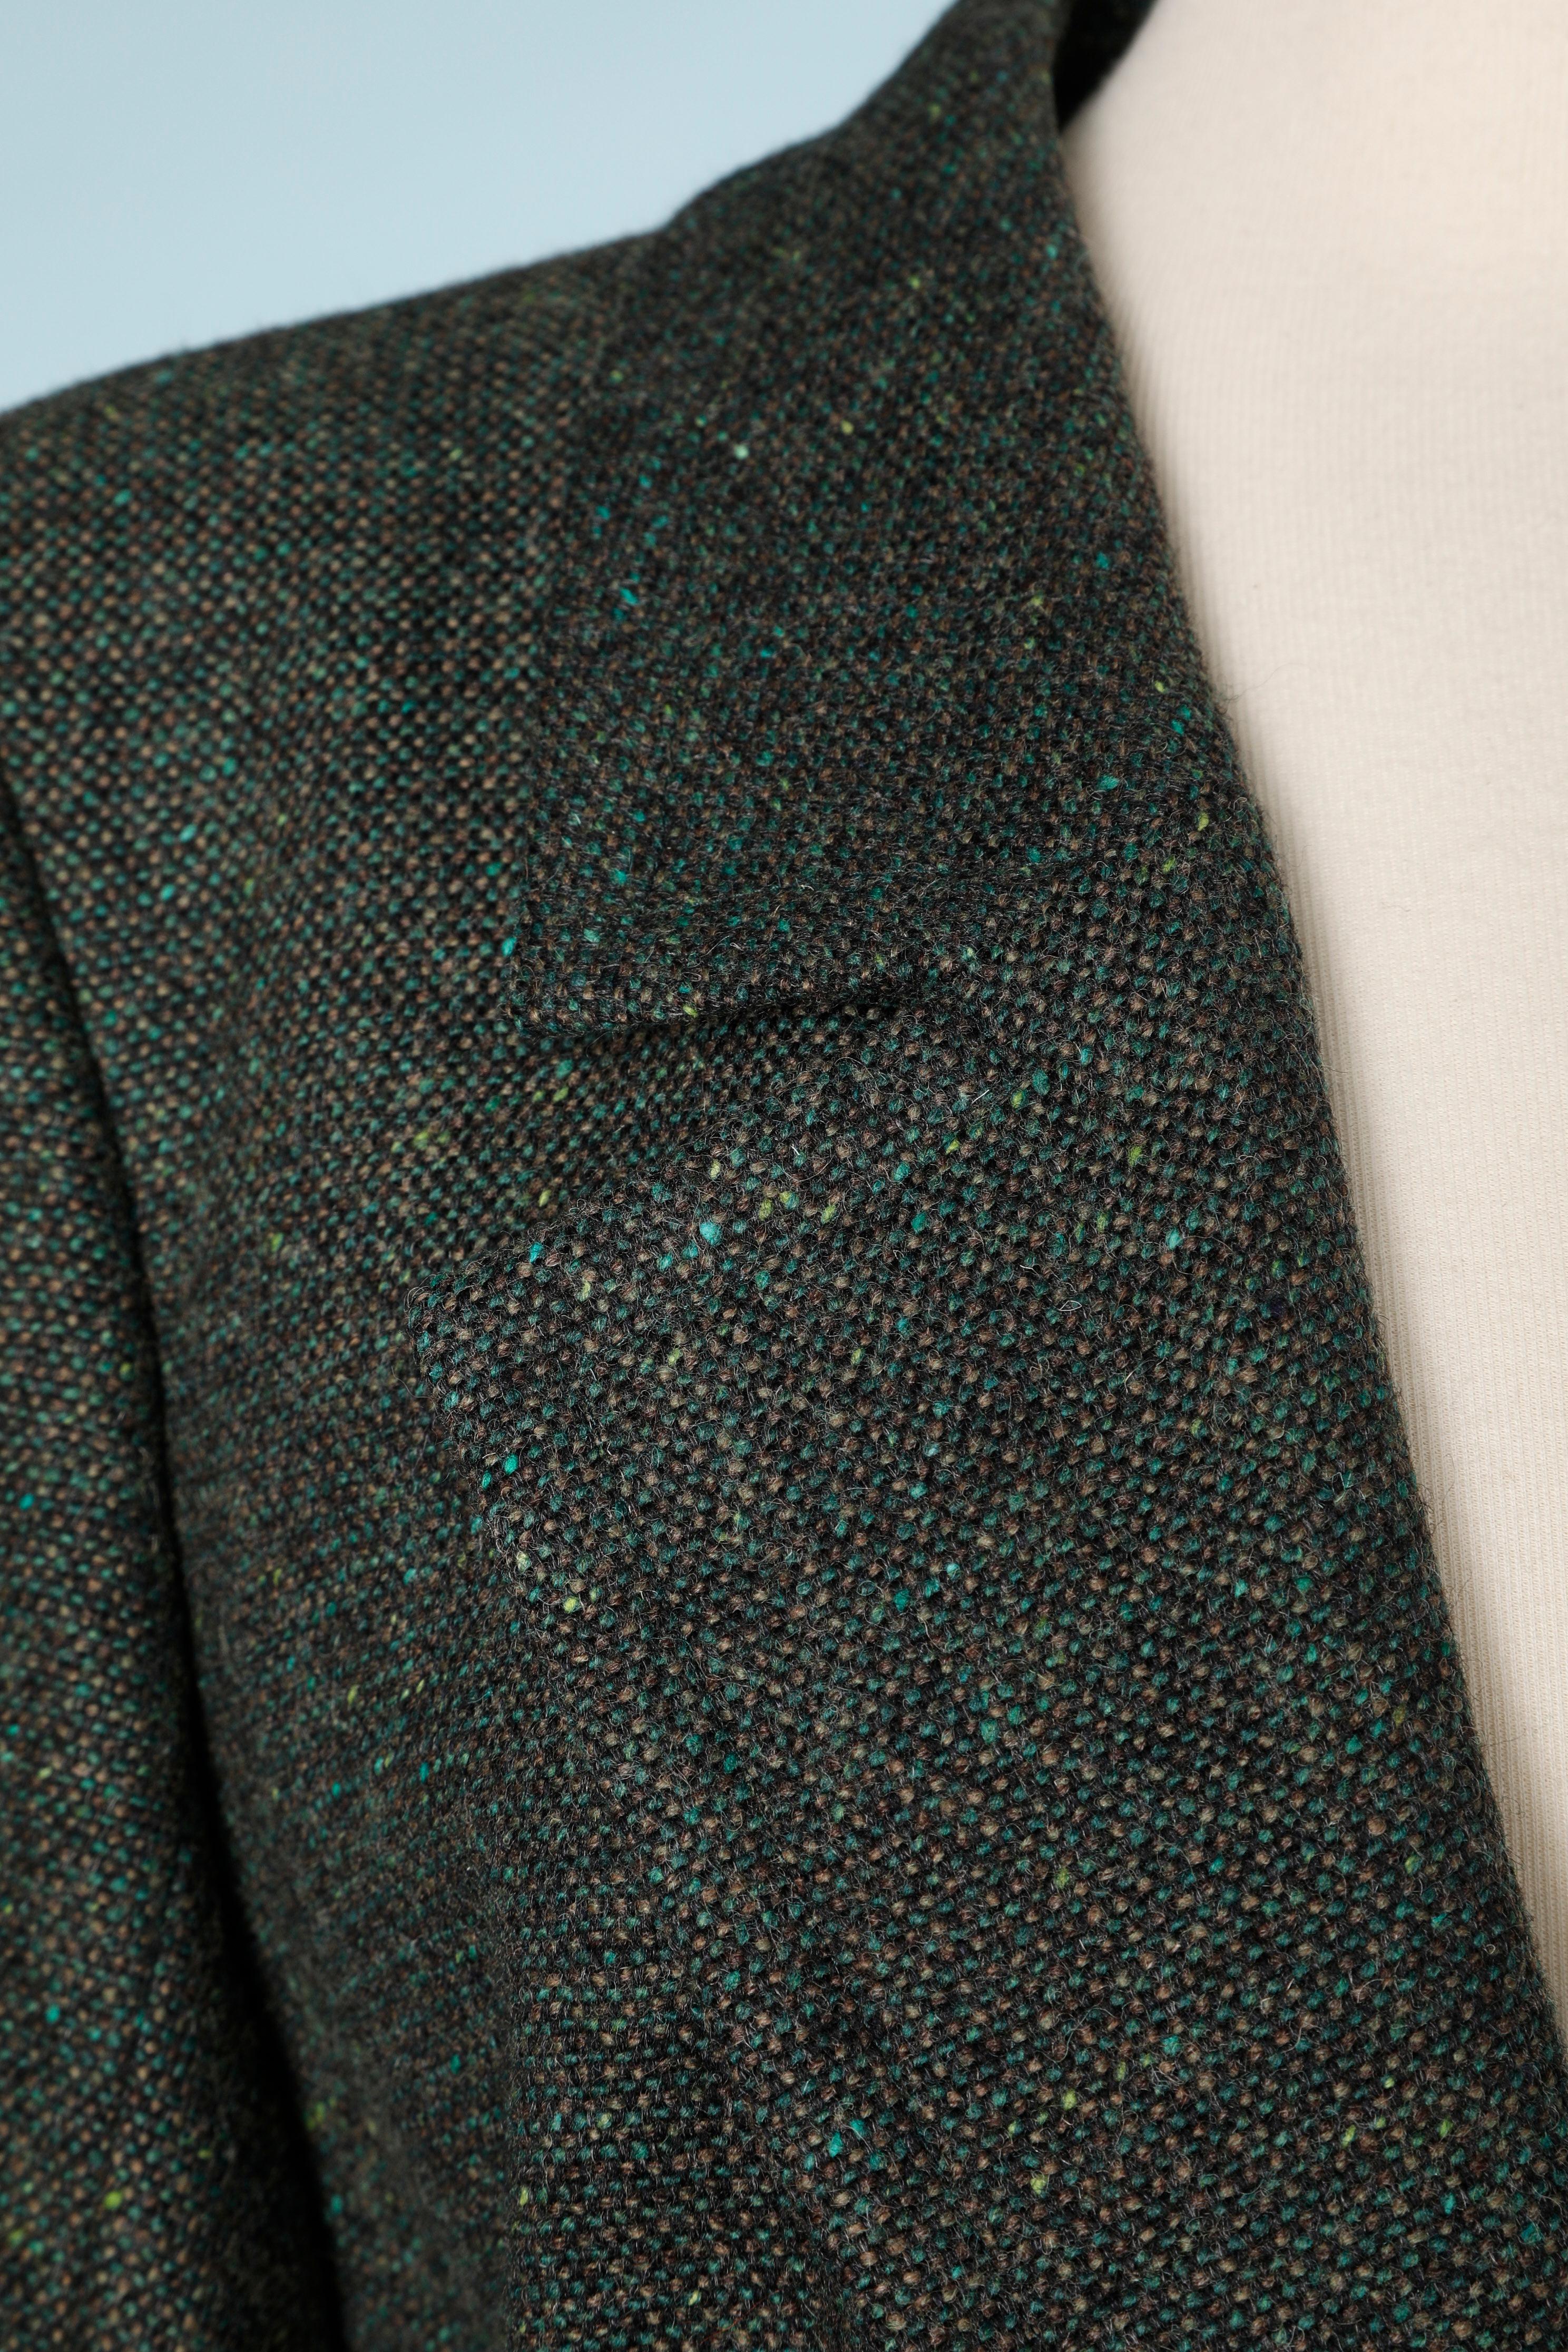 Green wool tweed skirt-suit. Metal buttons. Shoulder pads. Satin lining.
SIZE 40 (L) 